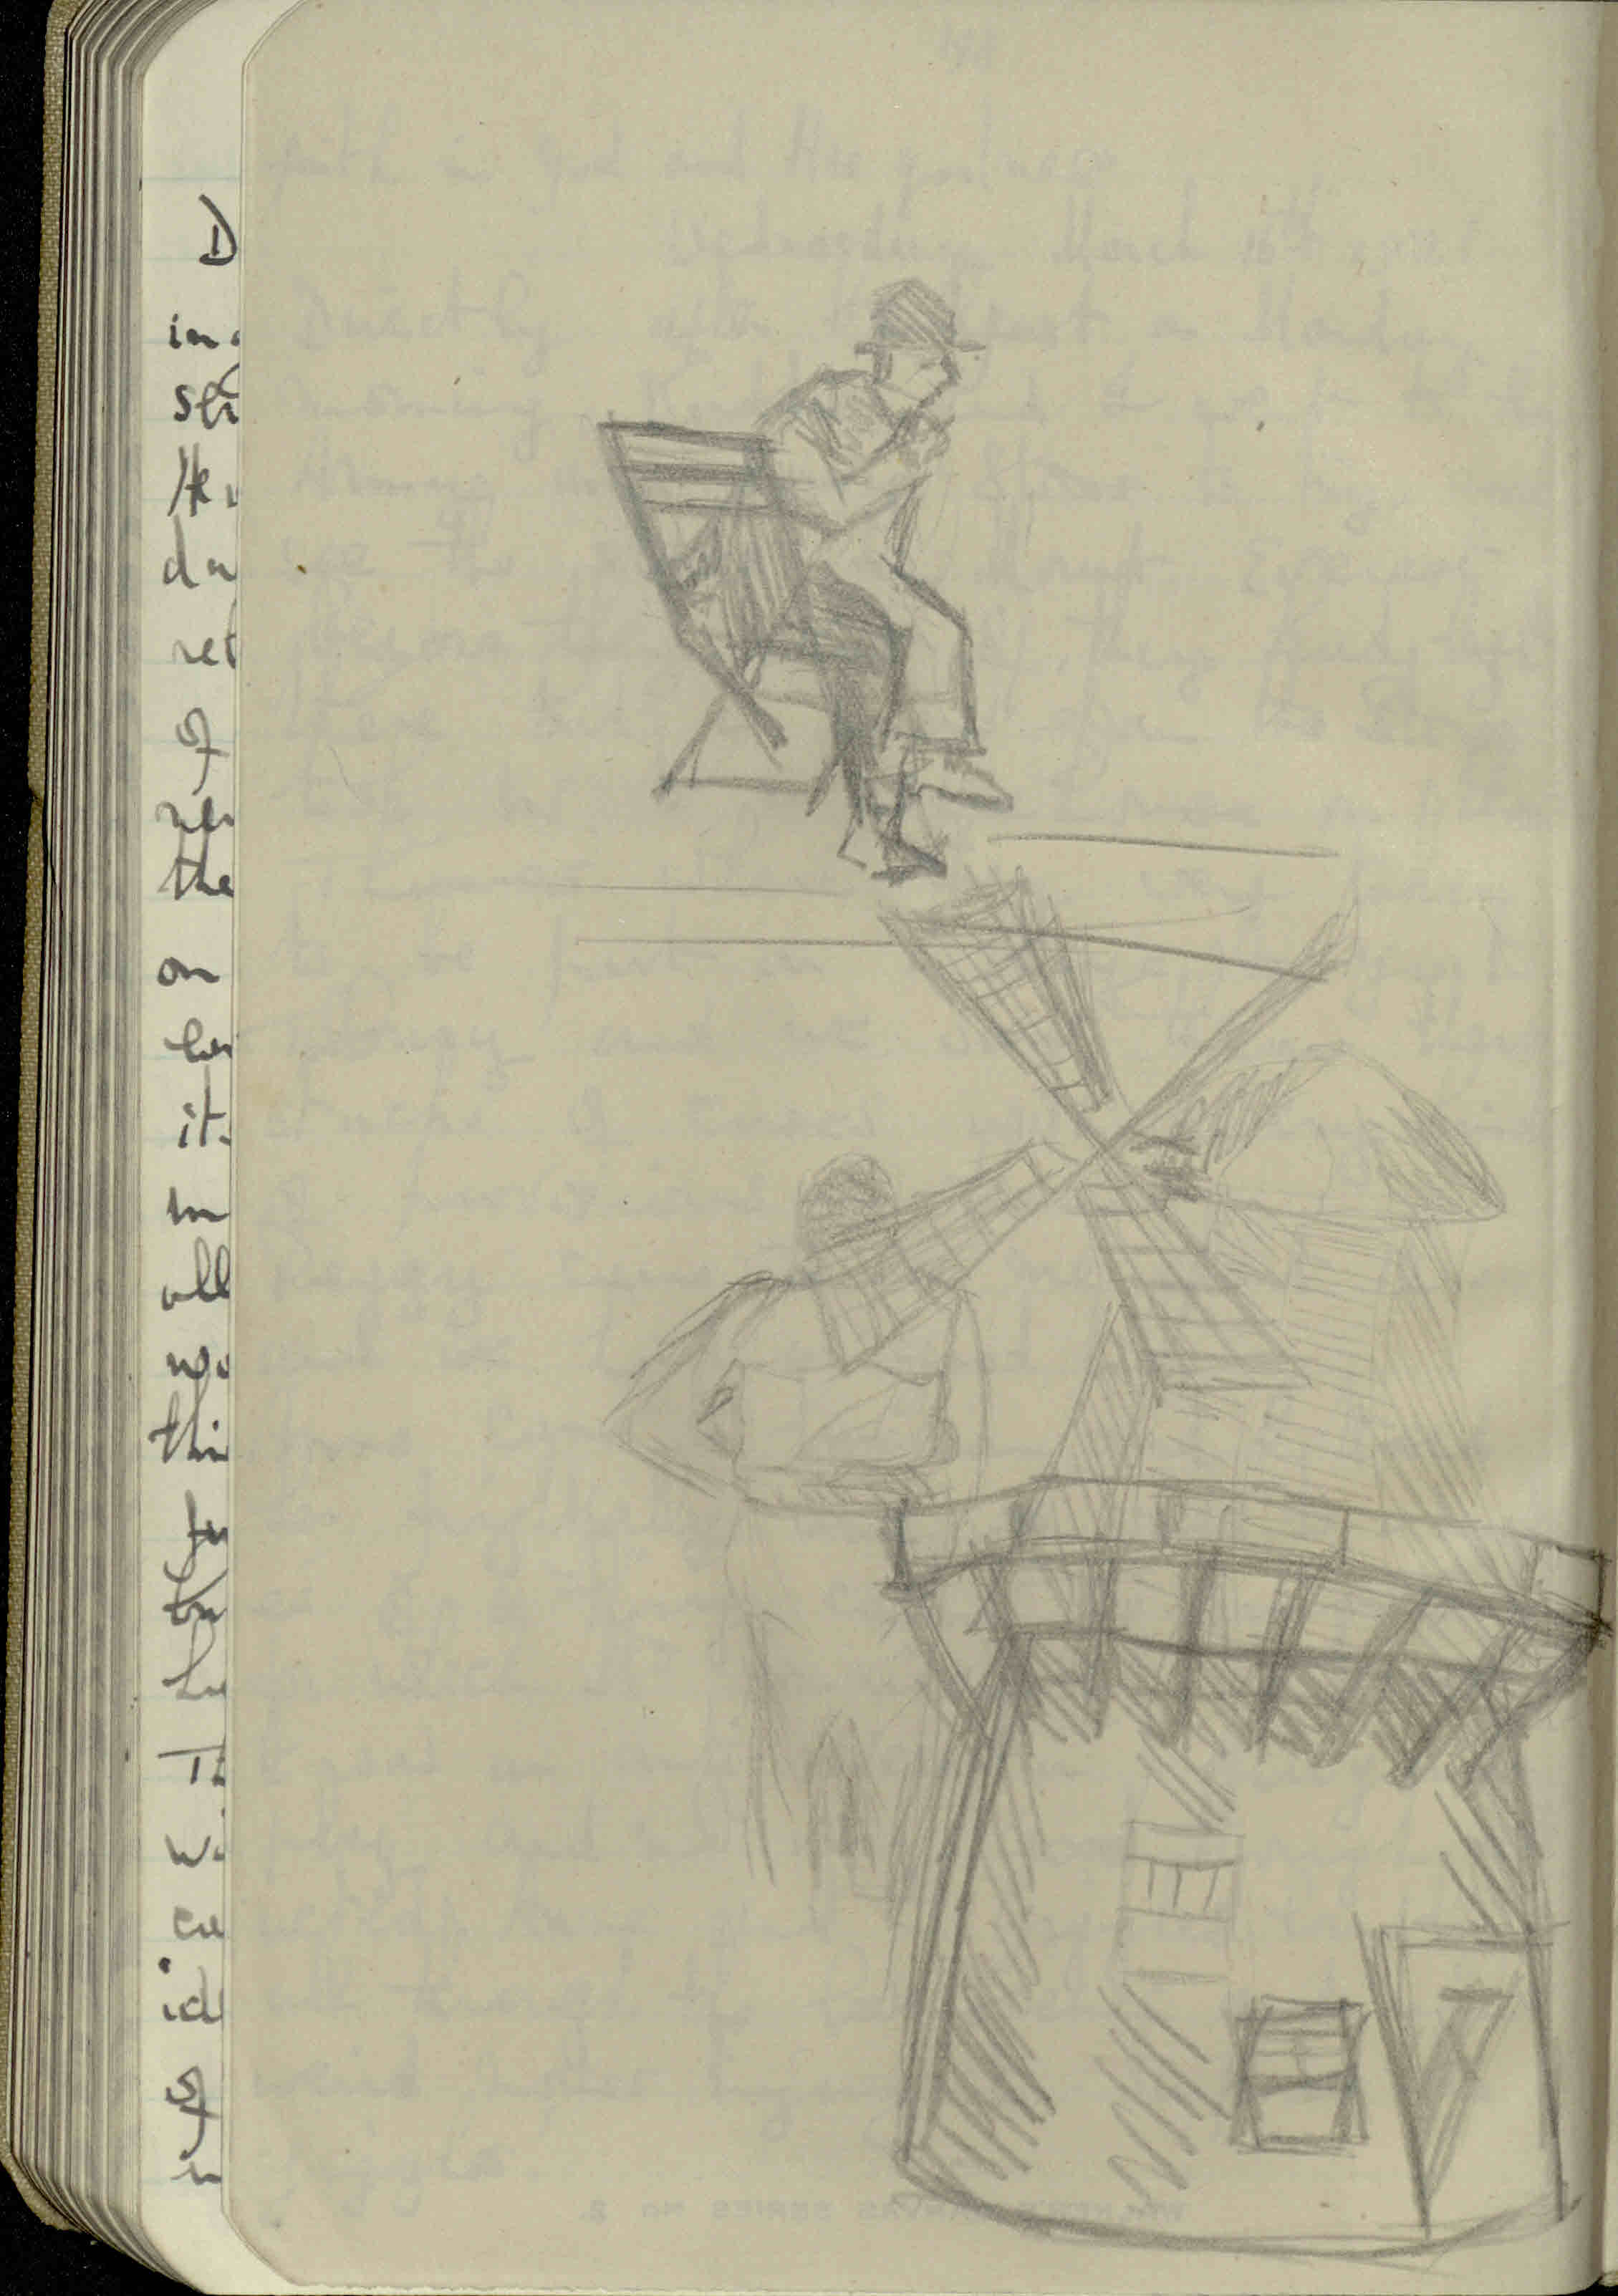 Sketches of two figures and a windmill